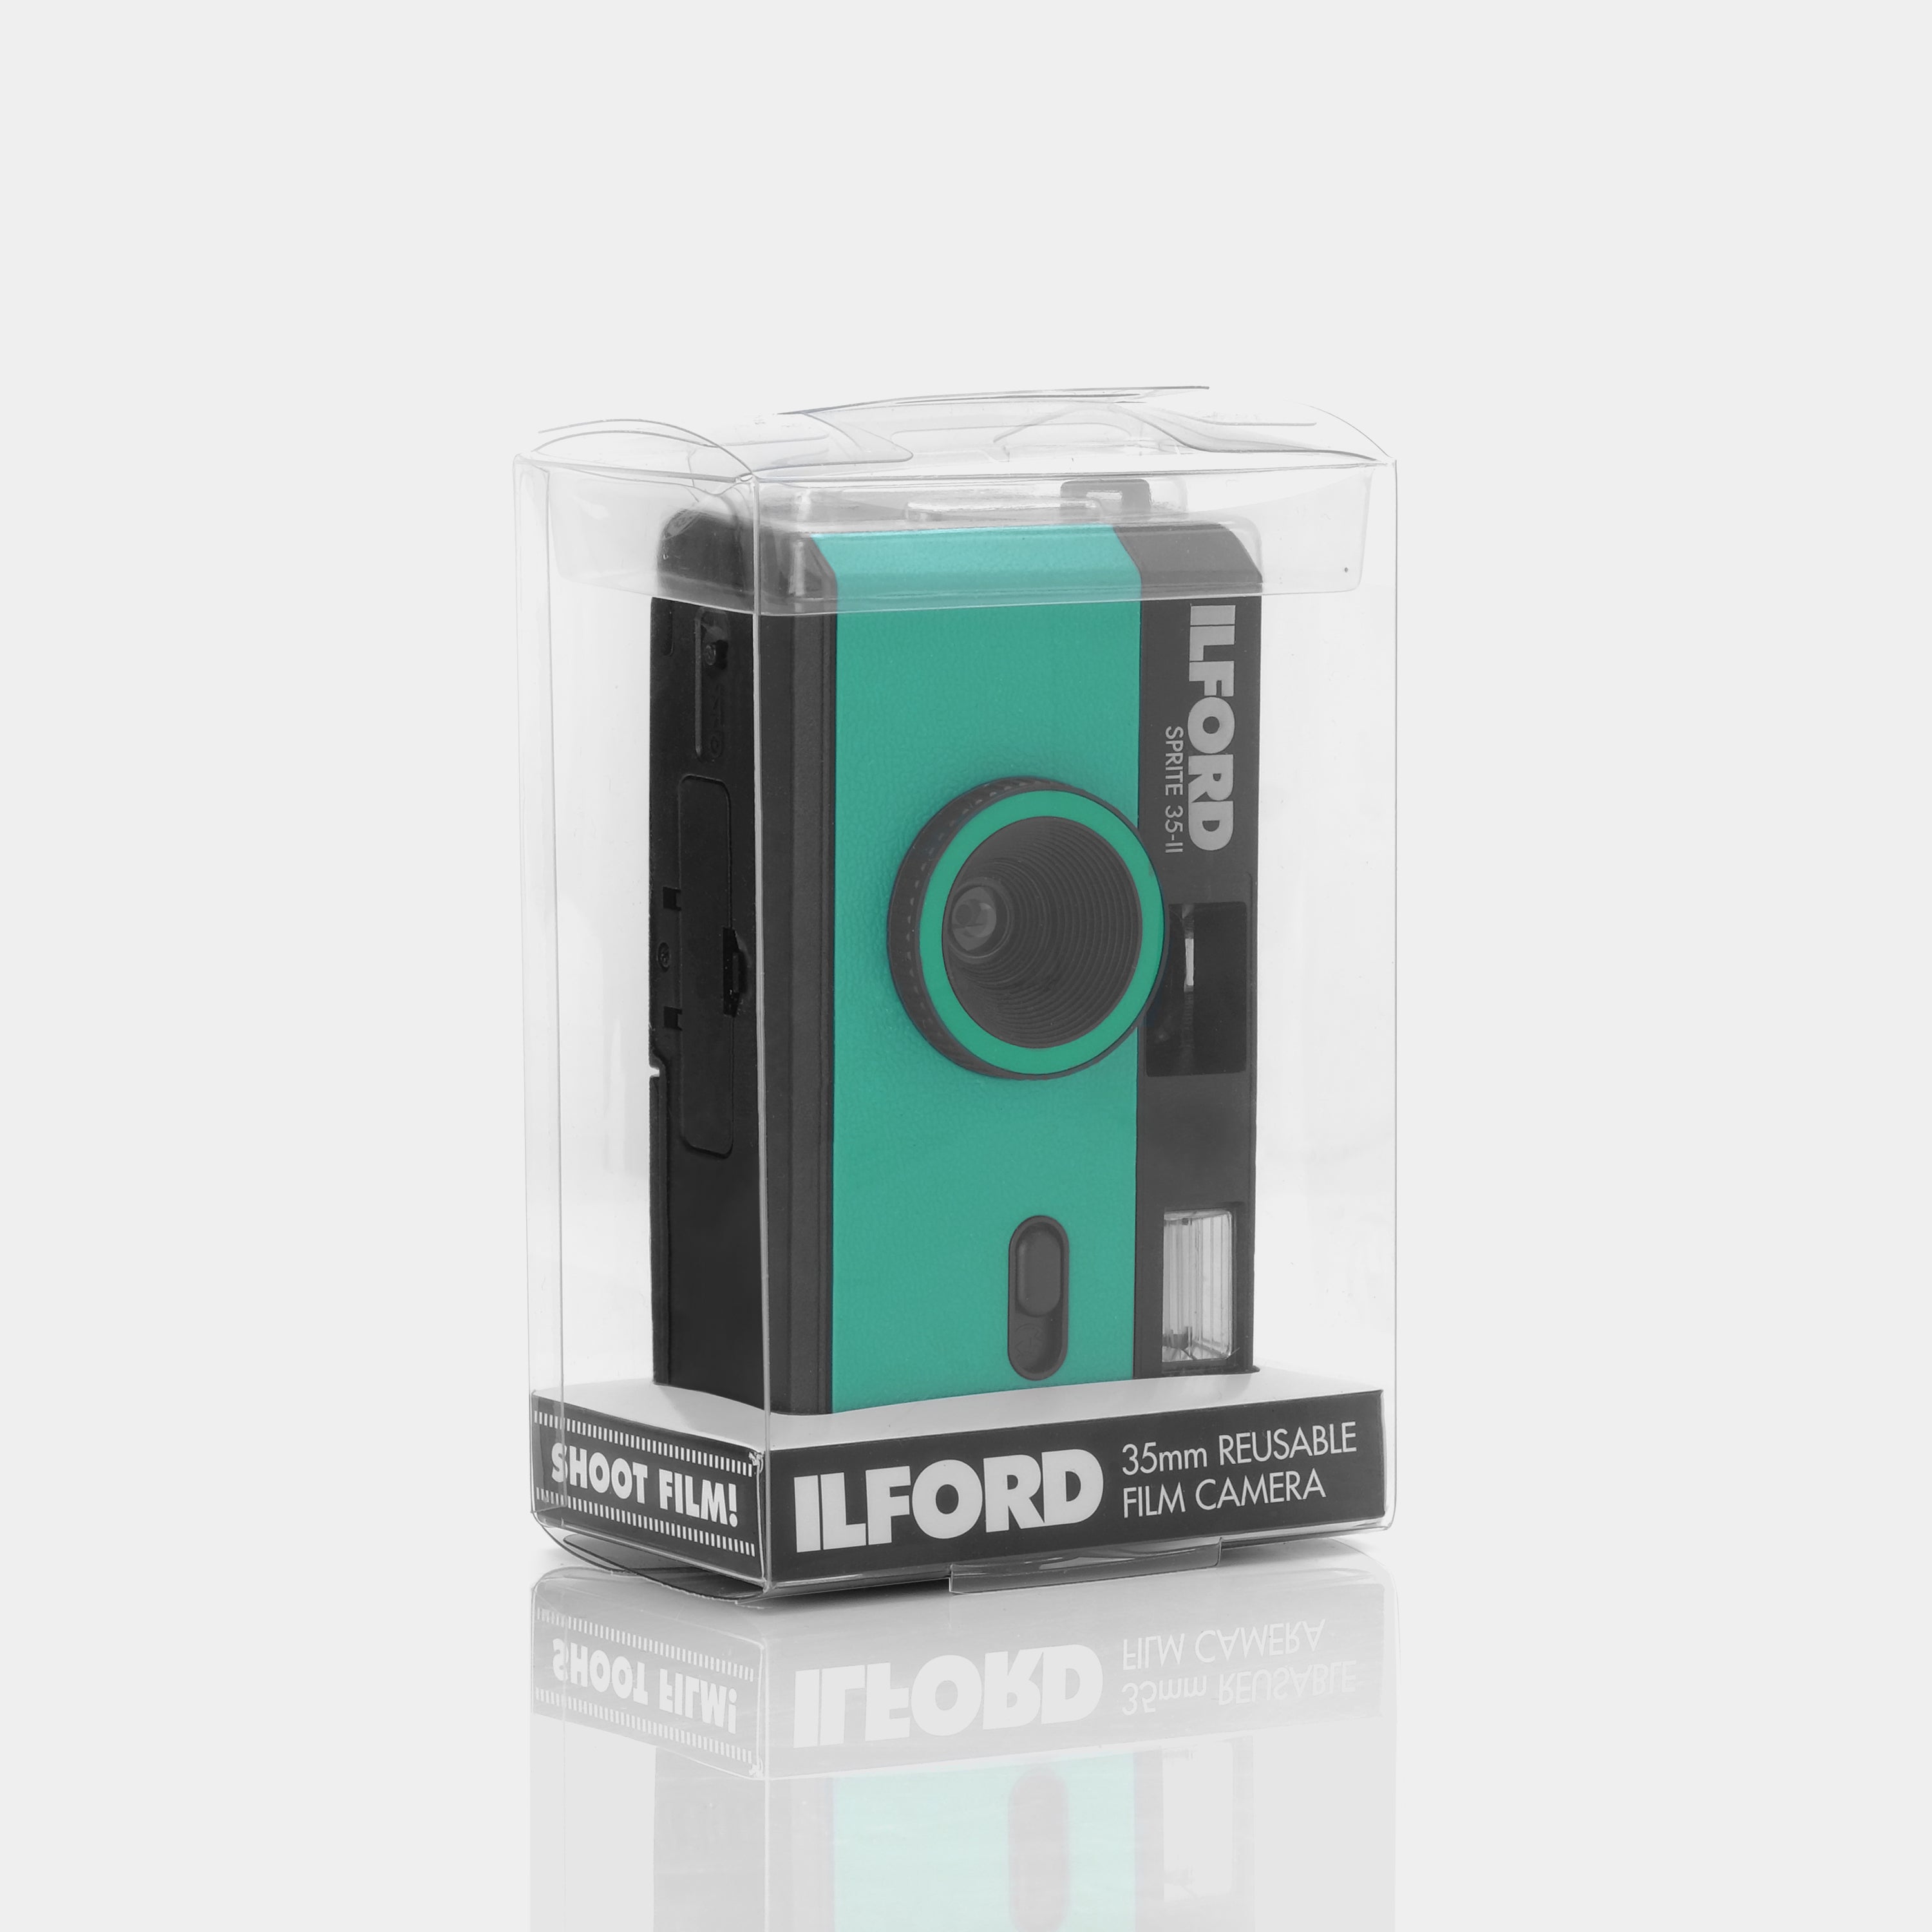 Ilford Sprite 35-II Reusable 35mm Point and Shoot Film Camera - Green & Black